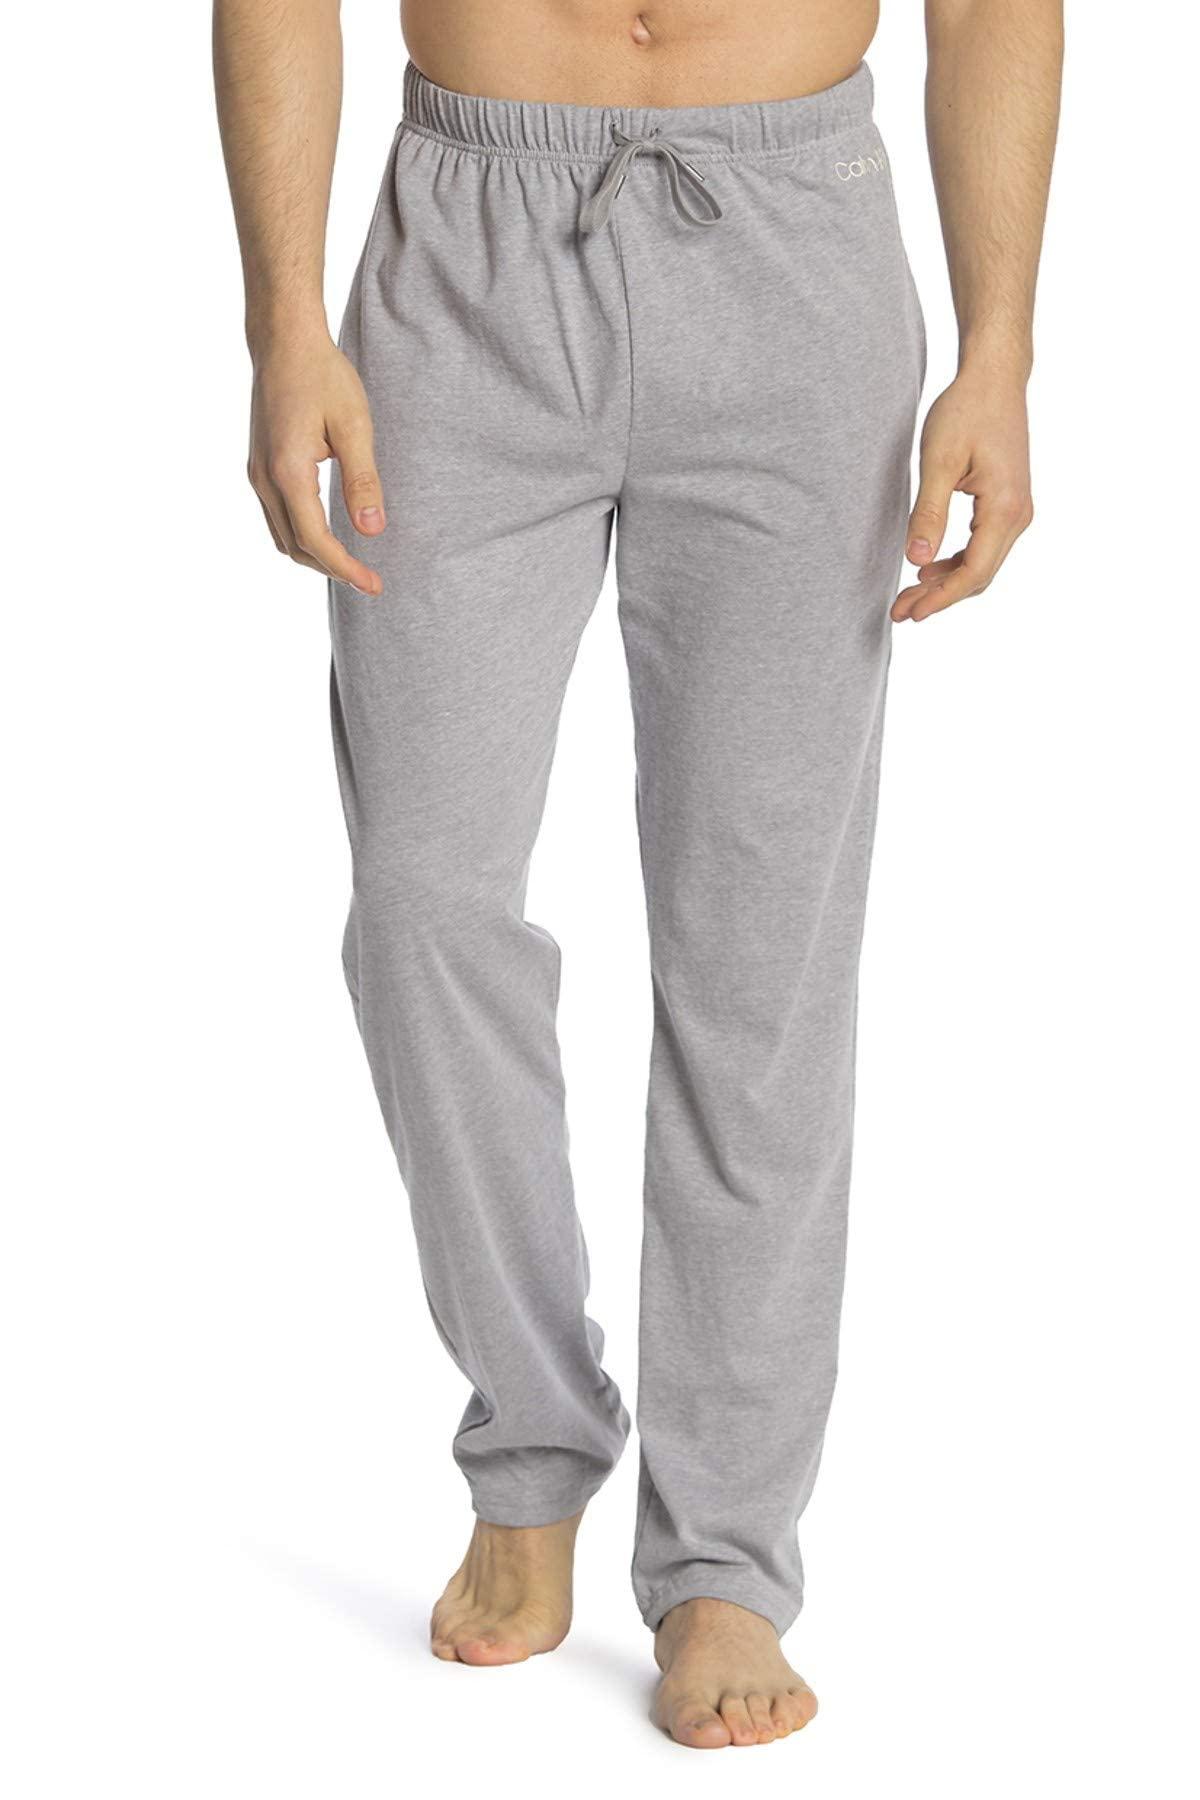 Buy Calvin Klein Pants | Clothing Online | THE ICONIC